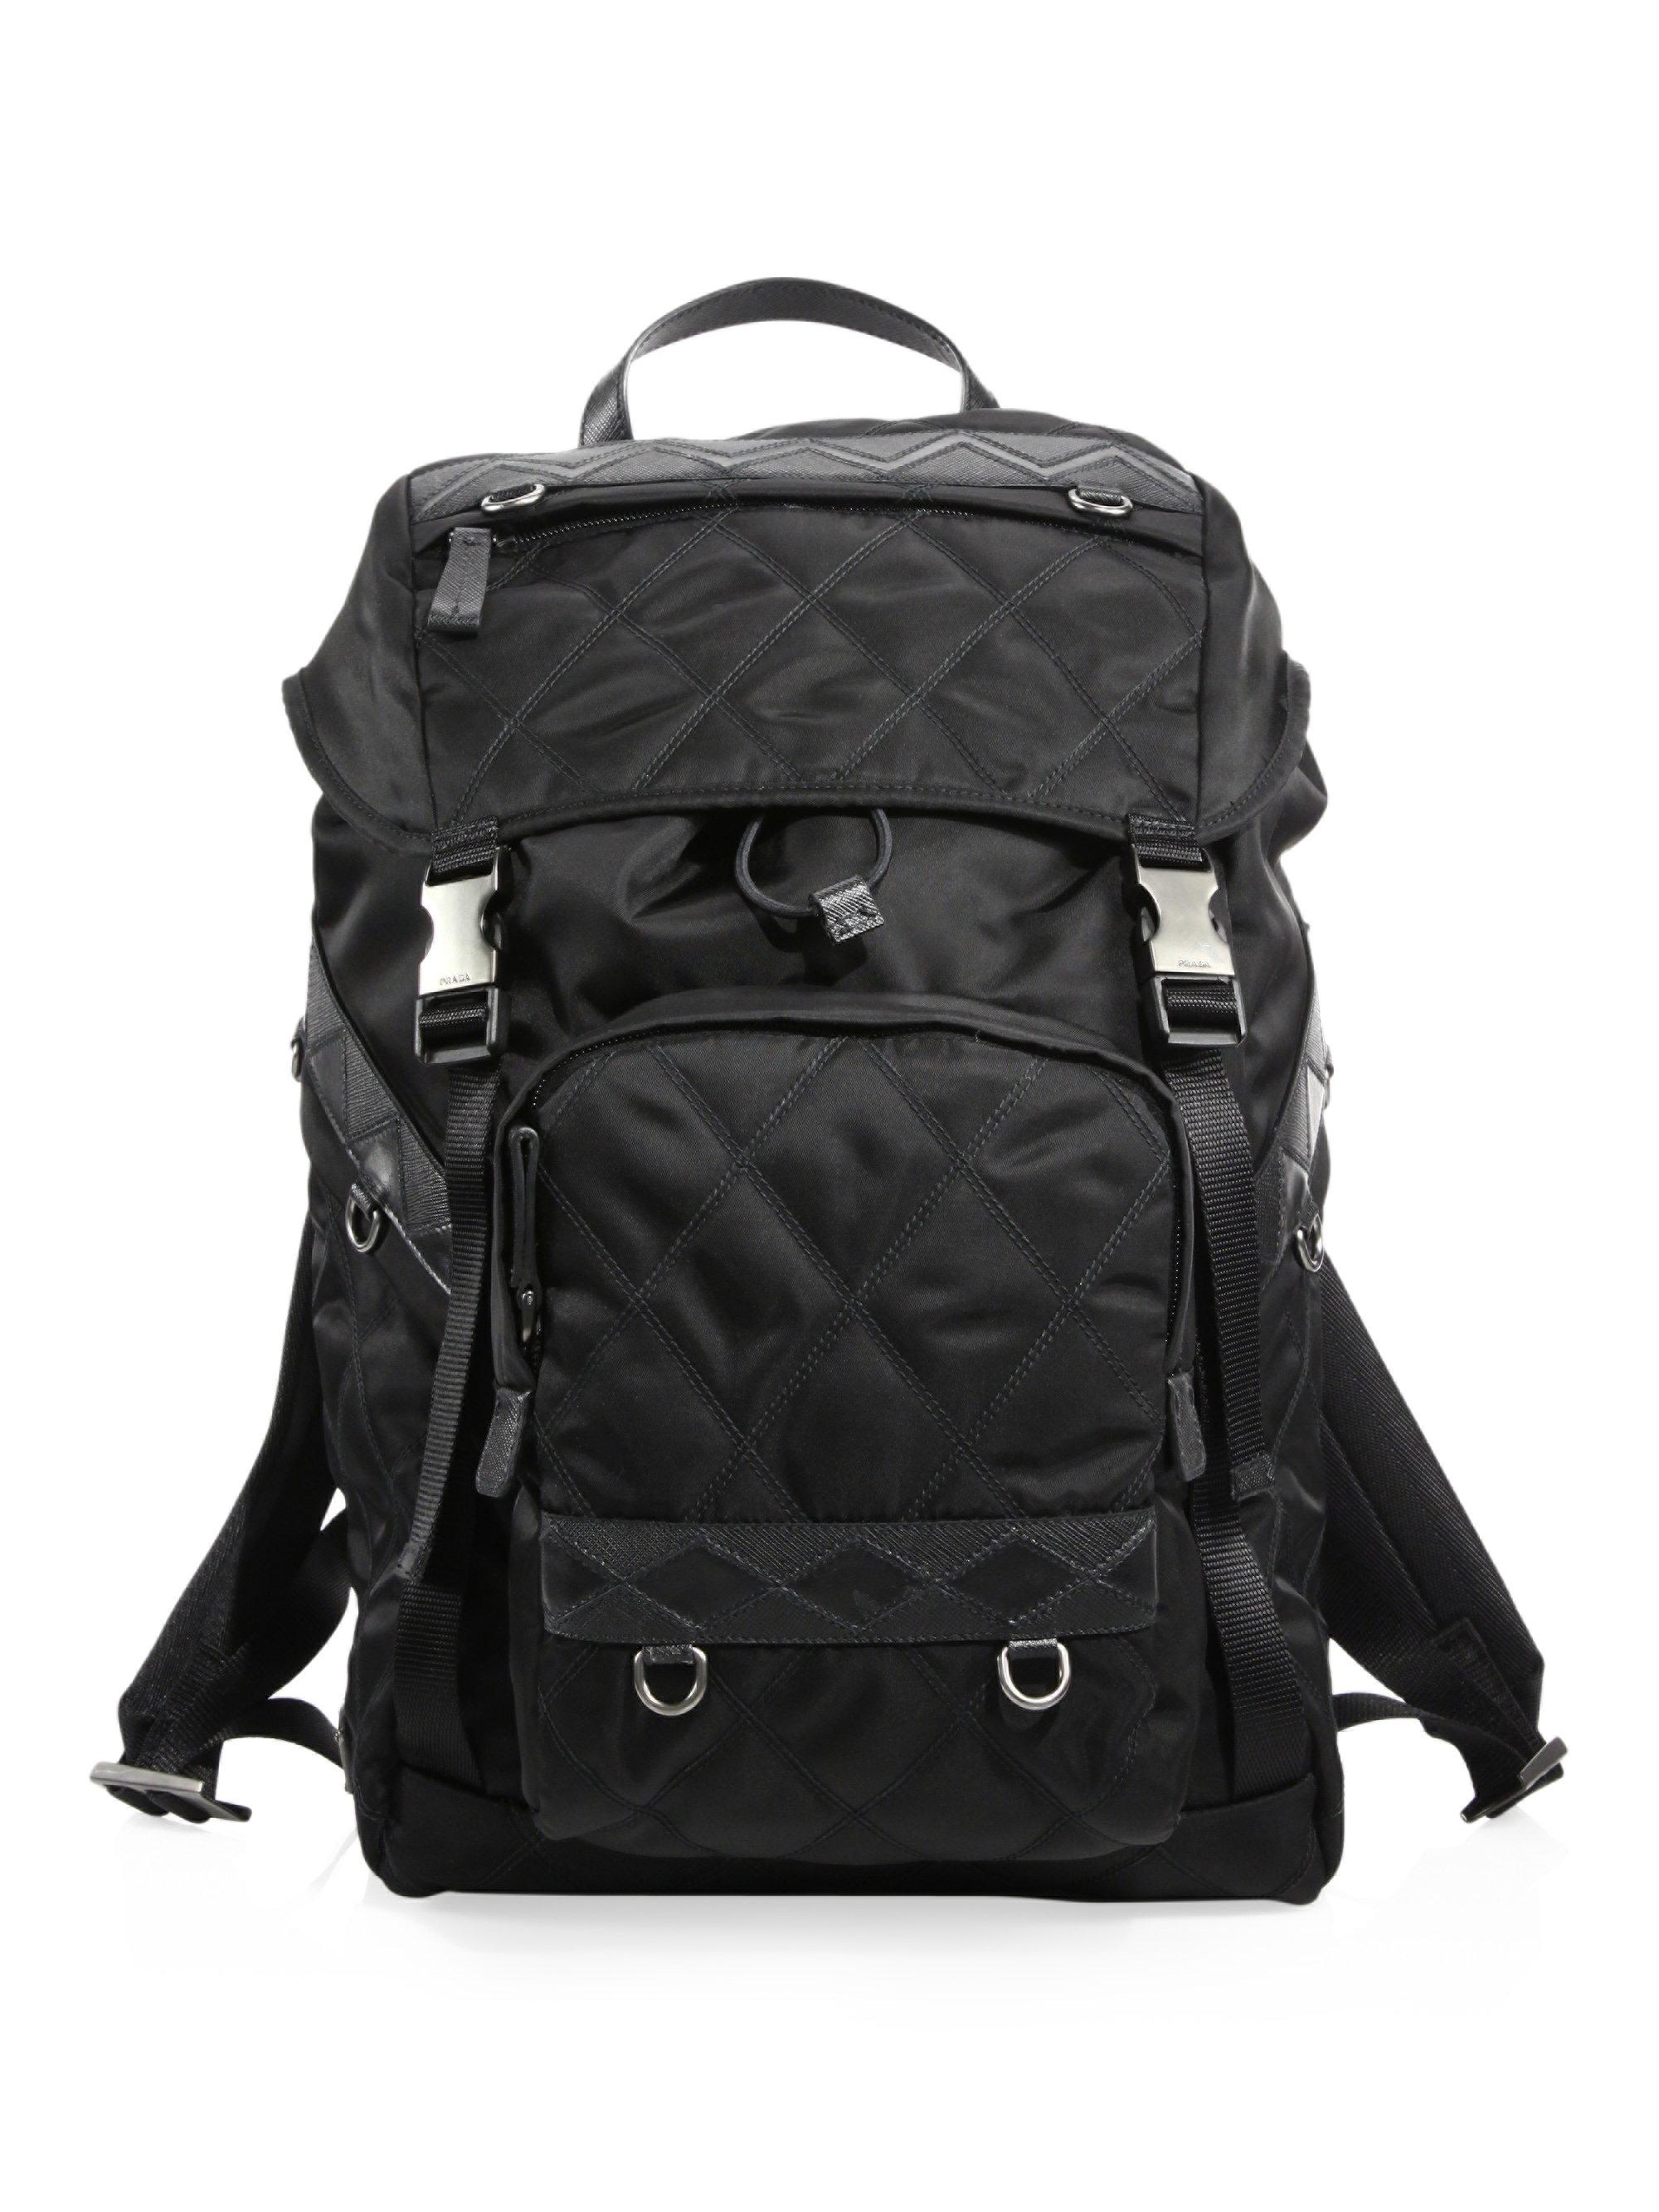 Prada Leather Quilted Nero Backpack in 